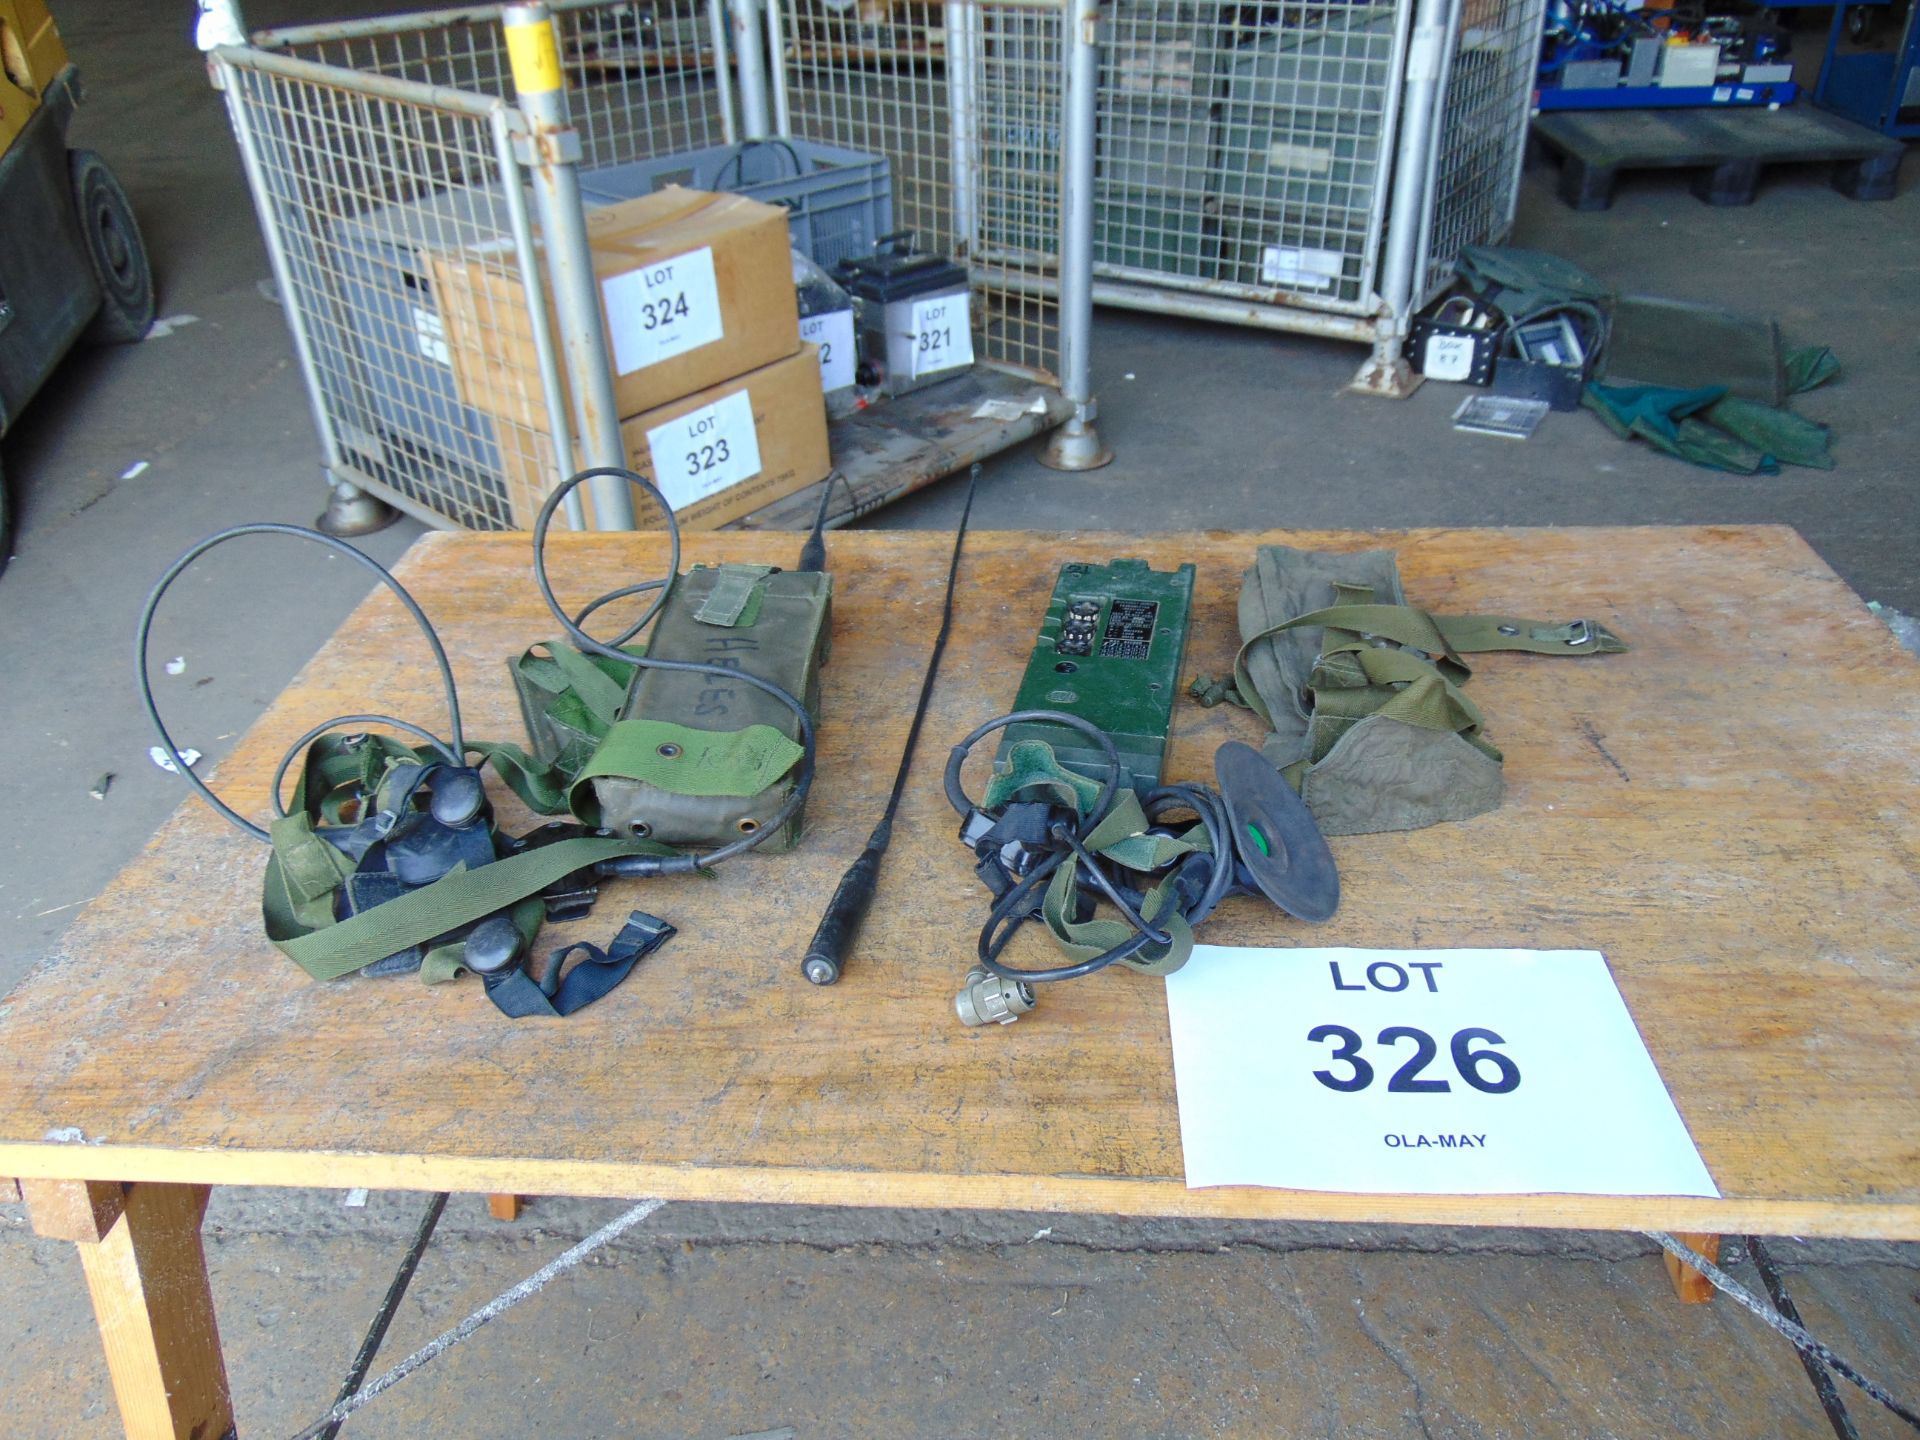 2 x RT 349 British Army Transmitter / Receiver c/w Pouch, Headset, Antenna and Battery Cassette